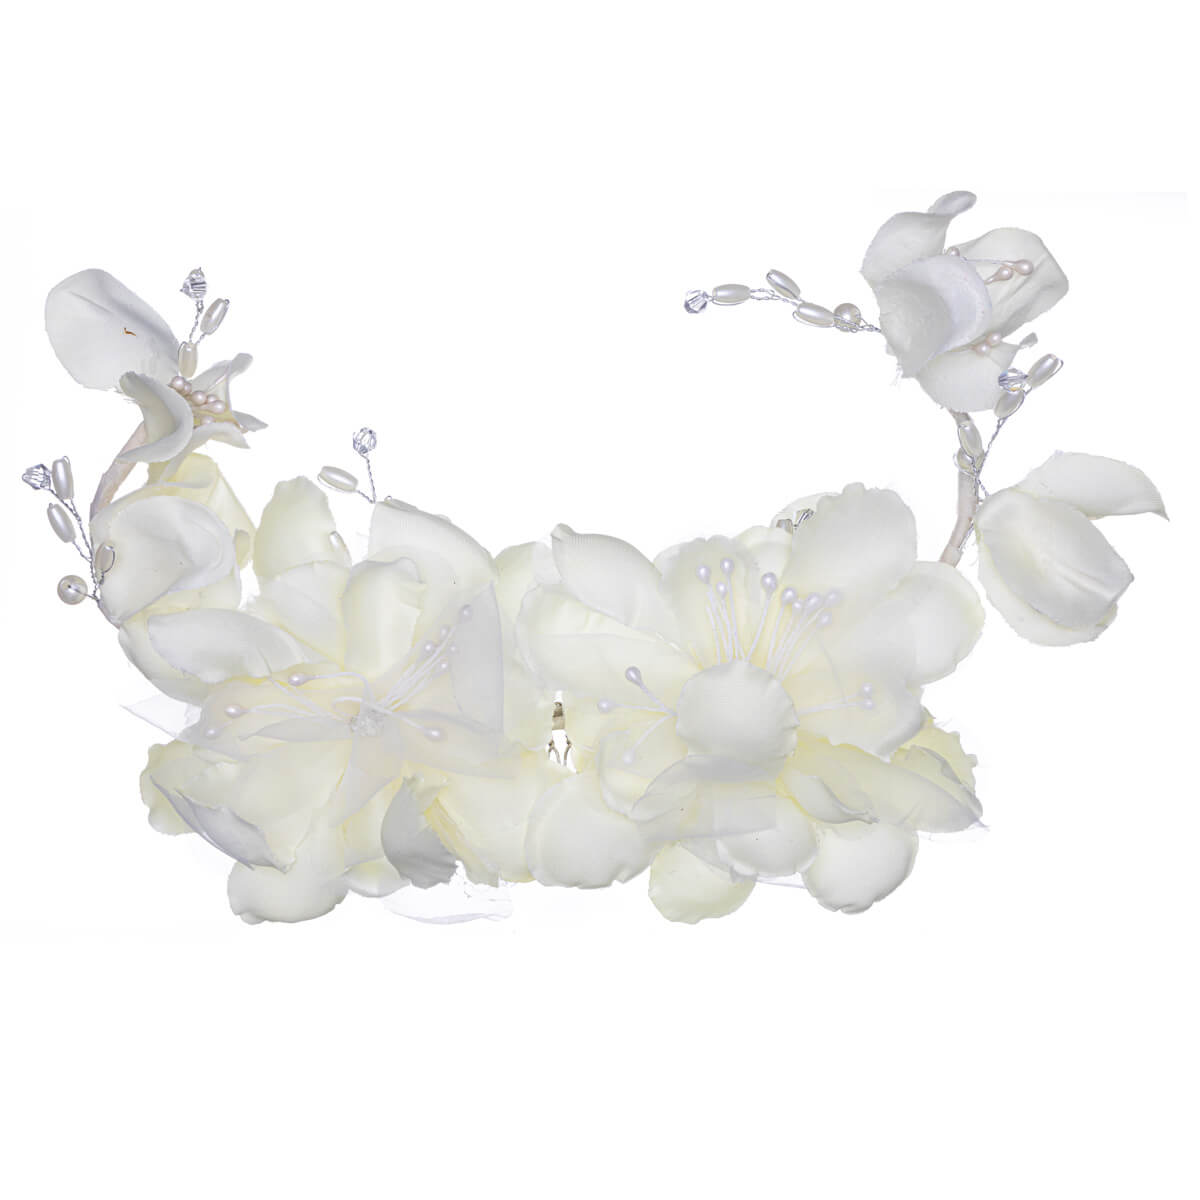 Fabric flower shaped hairpiece with side comb